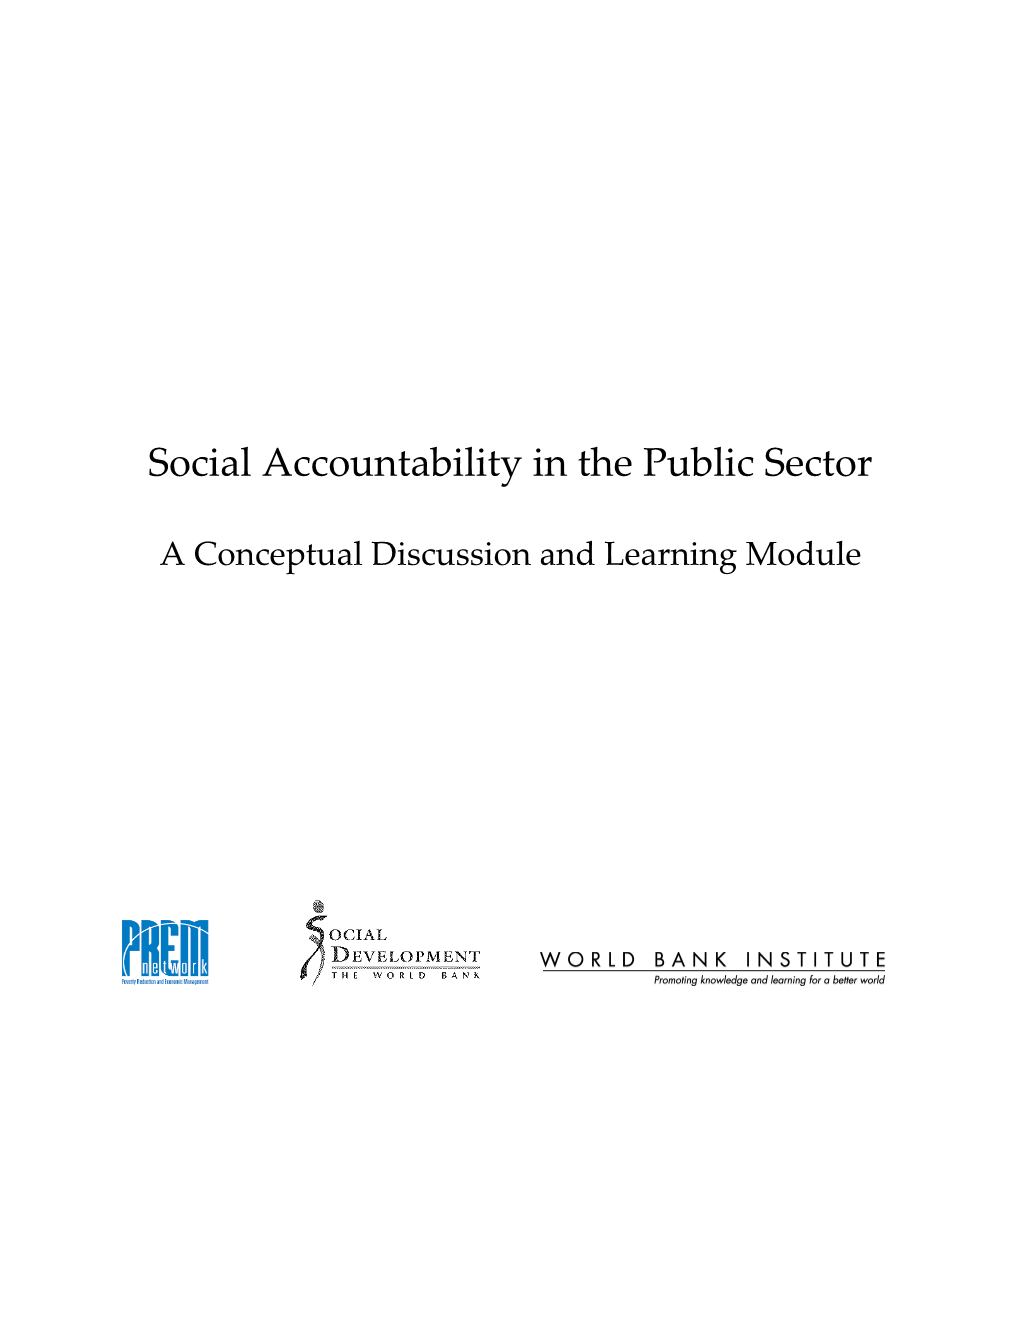 Social Accountability in the Public Sector